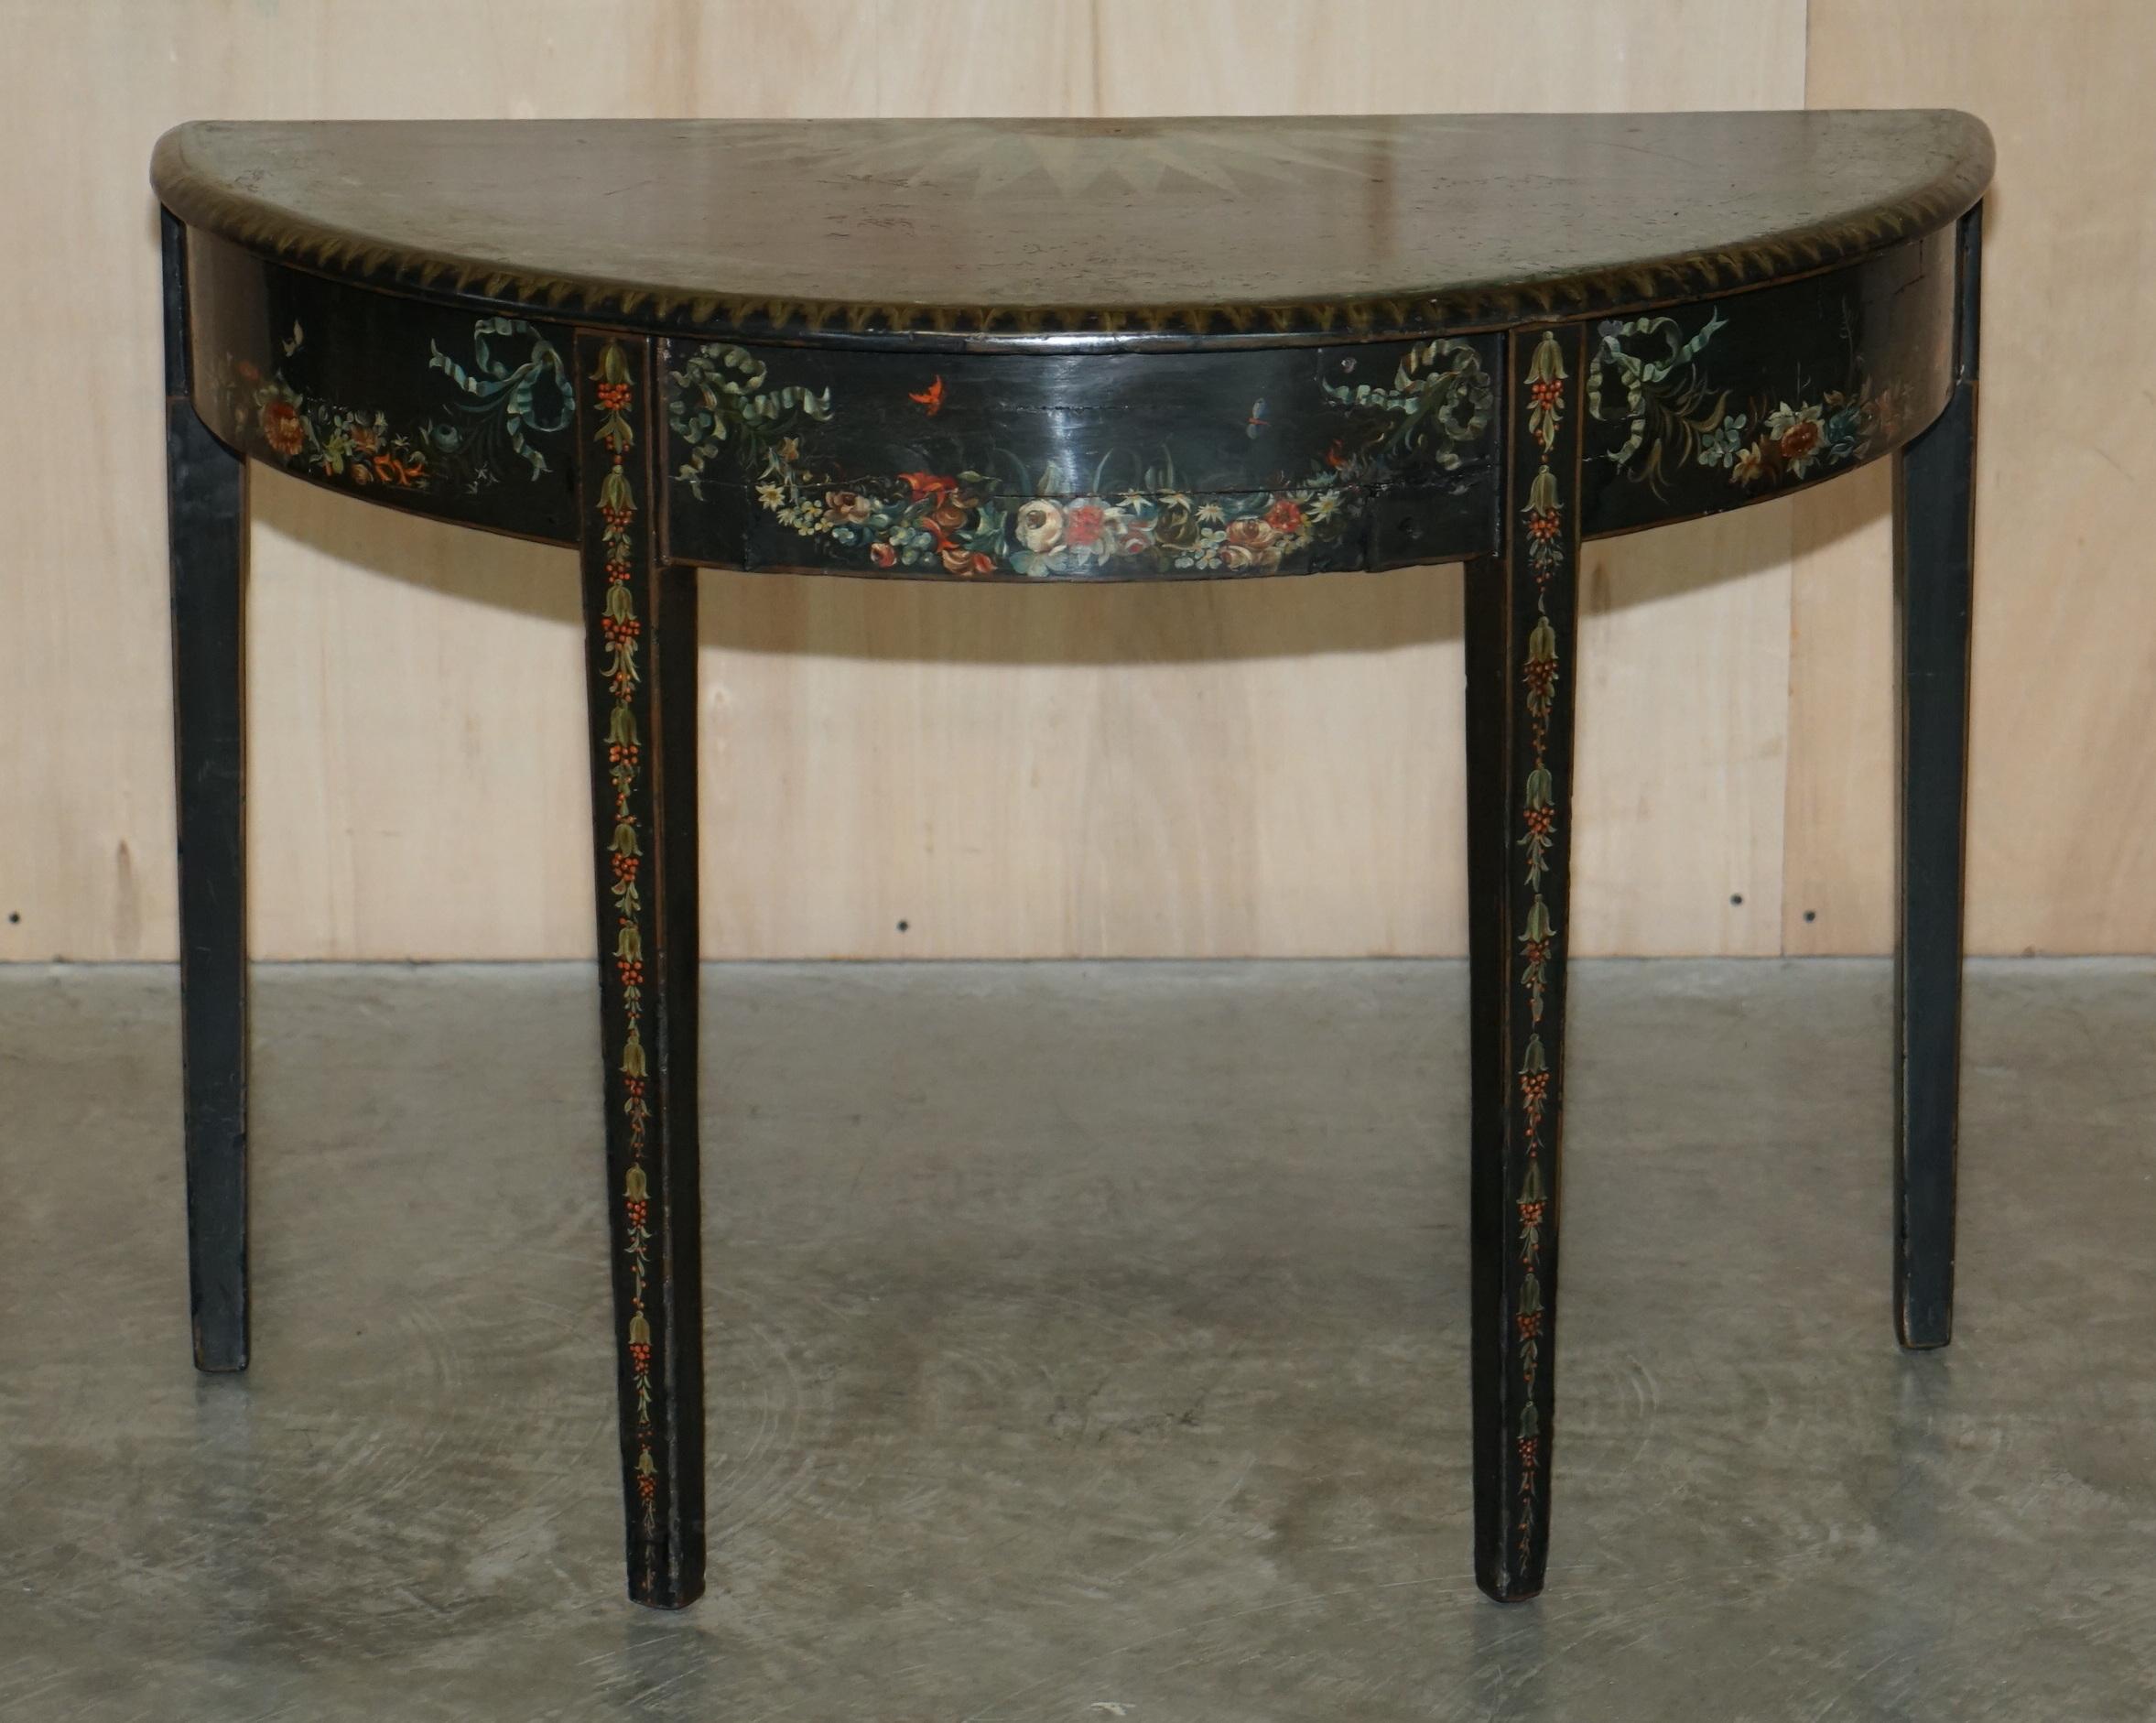 We are delighted to offer for sale this sublime 18th century circa 1760 hand polychrome painted demi lune side table.

A very good looking and well made piece, most likely Italian, the painted finish is original and polychrome hence it has lasted